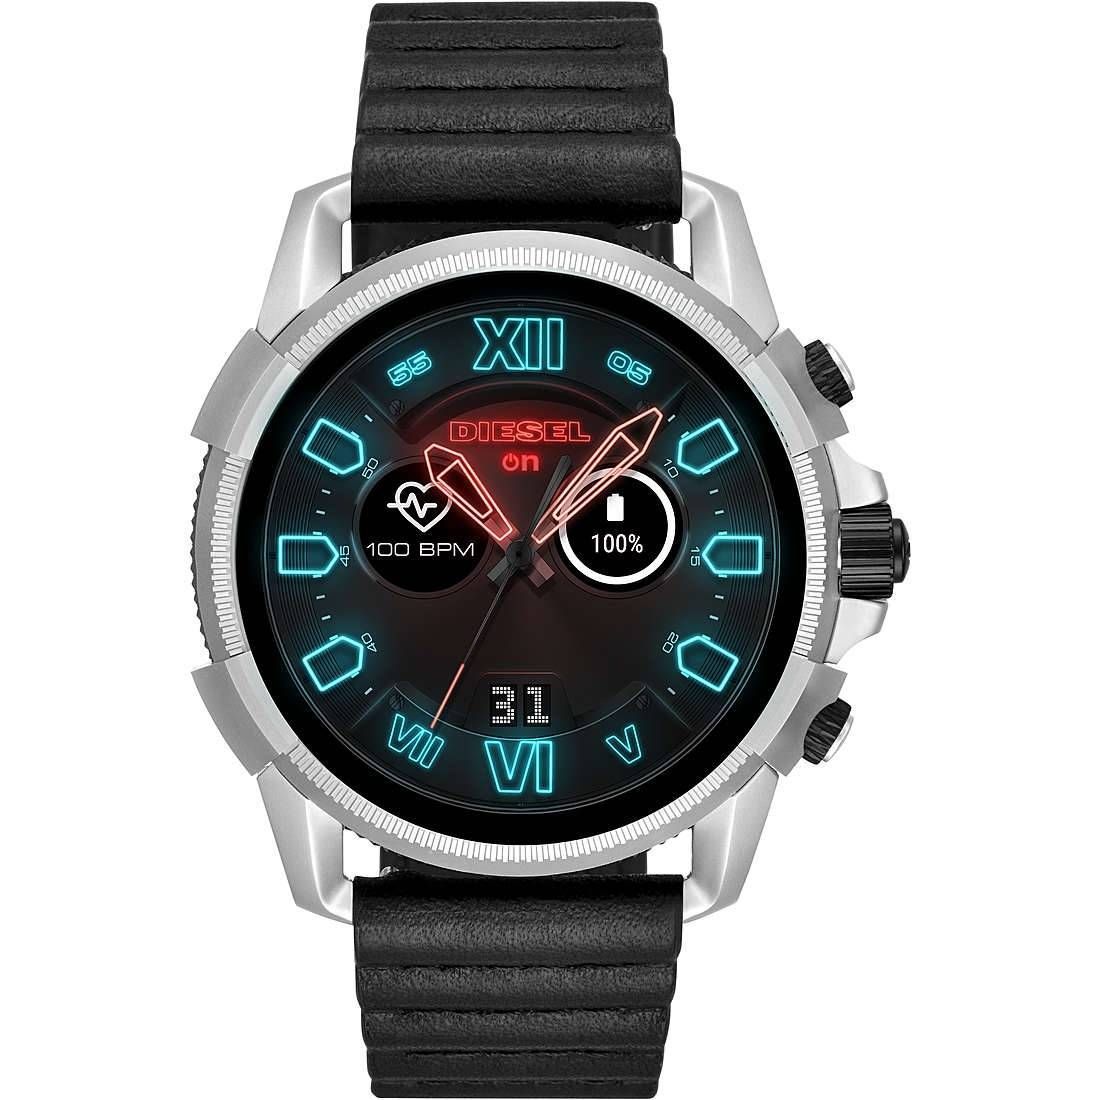 DIESEL On Full Guard Touchscreen Smartwatch Black Leather Strap DT2008